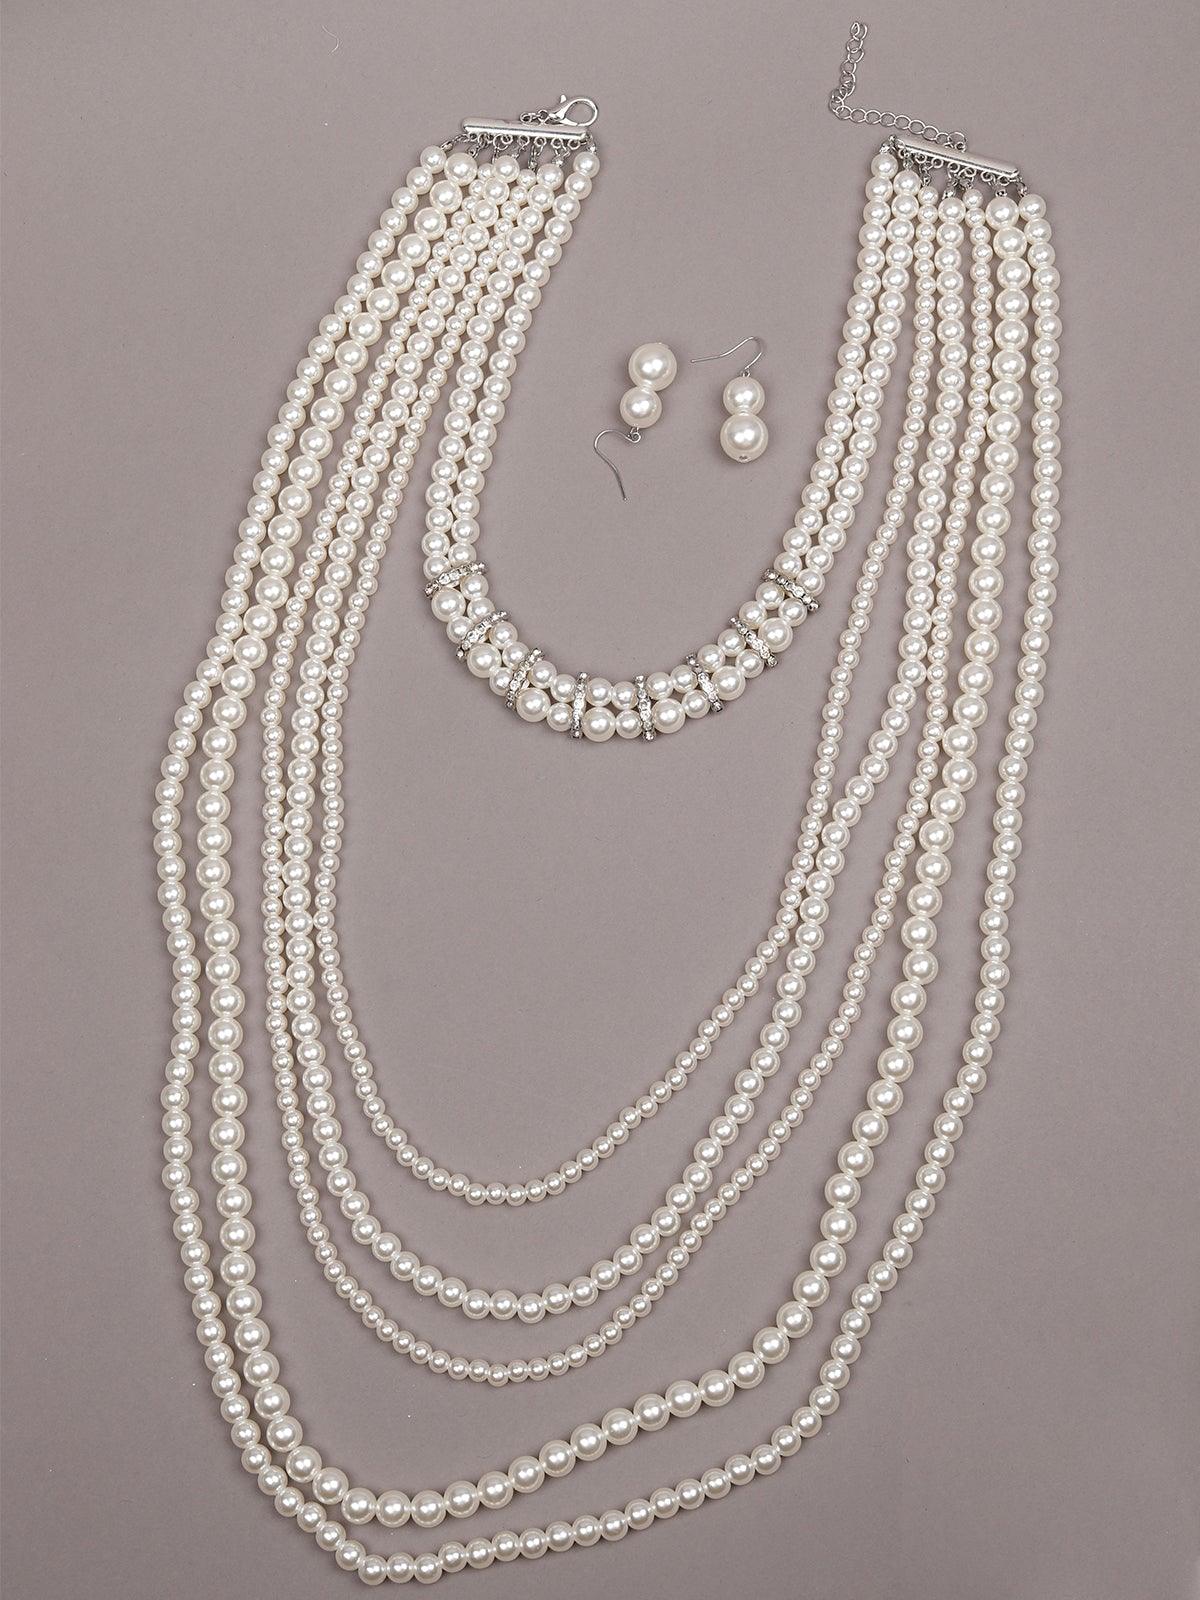 Women's Exquisite Long Overlapping Pearl Necklace - Odette